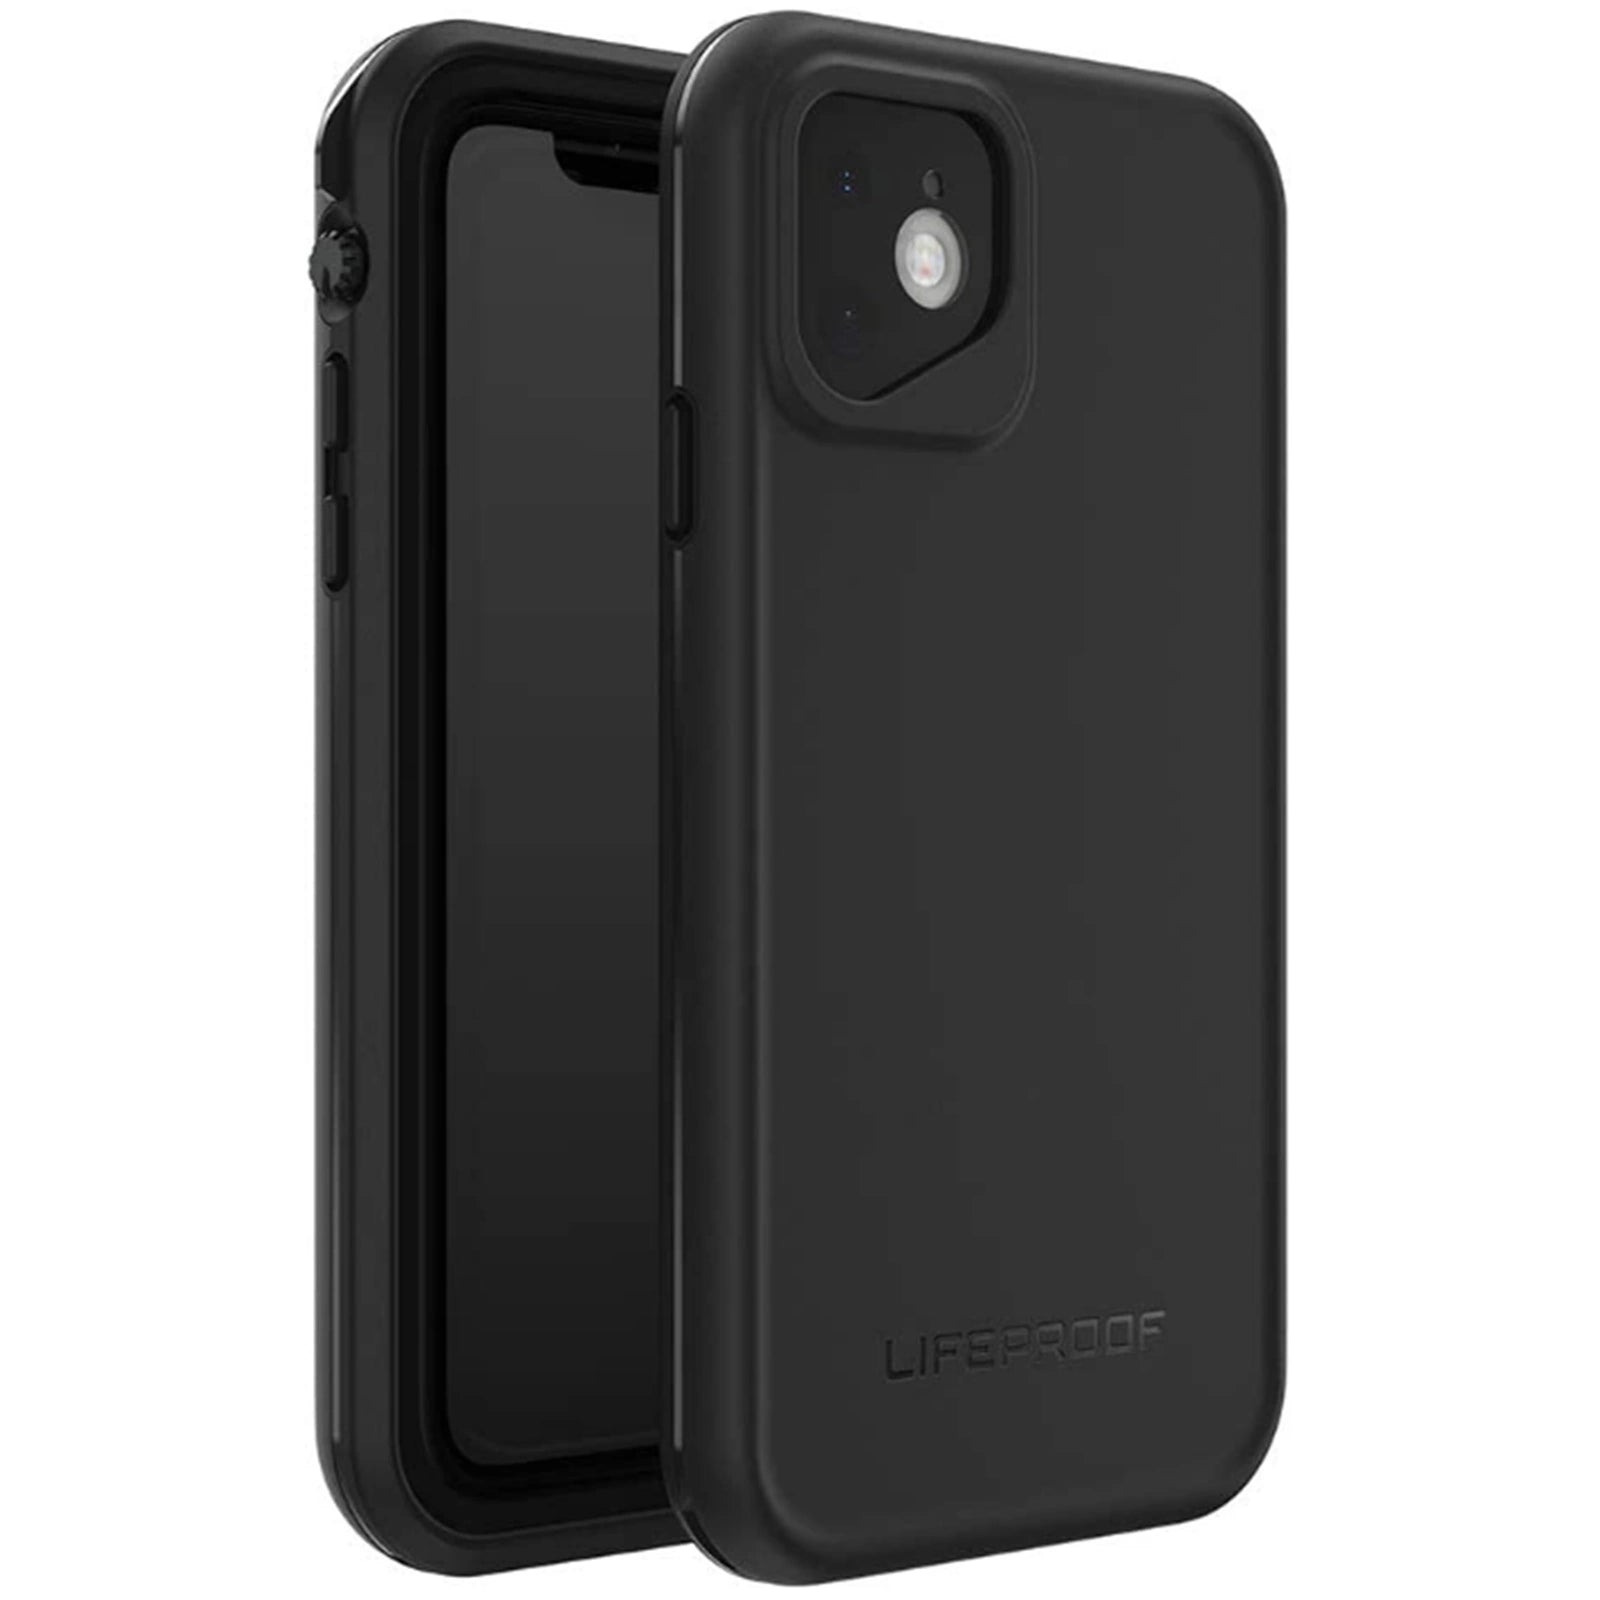 LIFEPROOF FRE FOR IPHONE 11 - BLACK - NEW